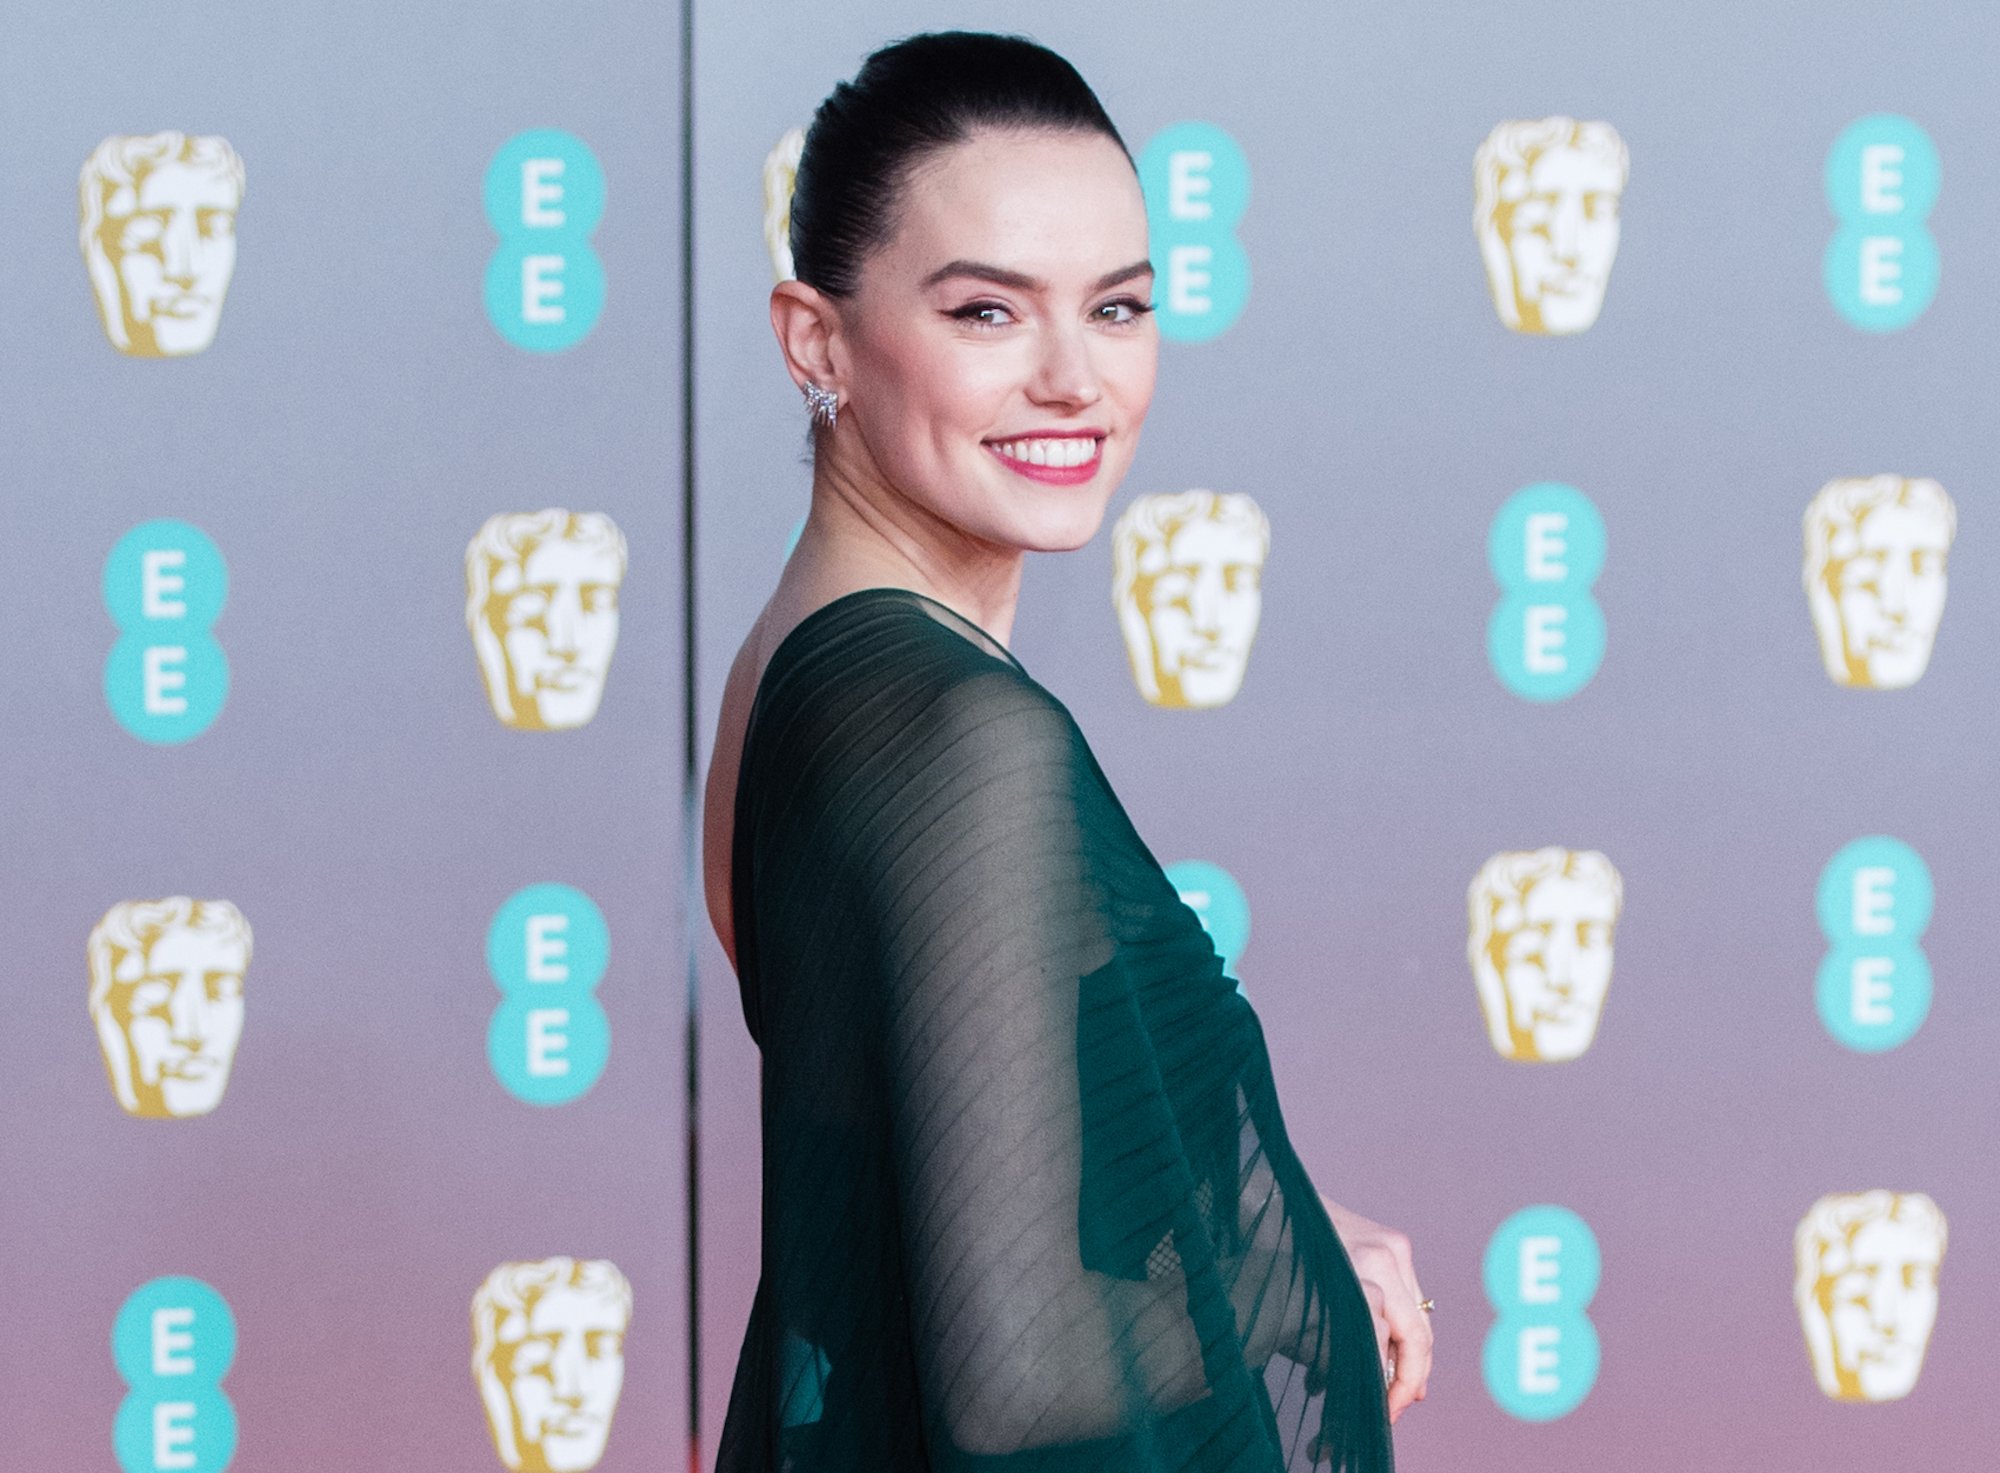 Daisy Ridley at the EE British Academy Film Awards 2020 on Feb. 02, 2020.